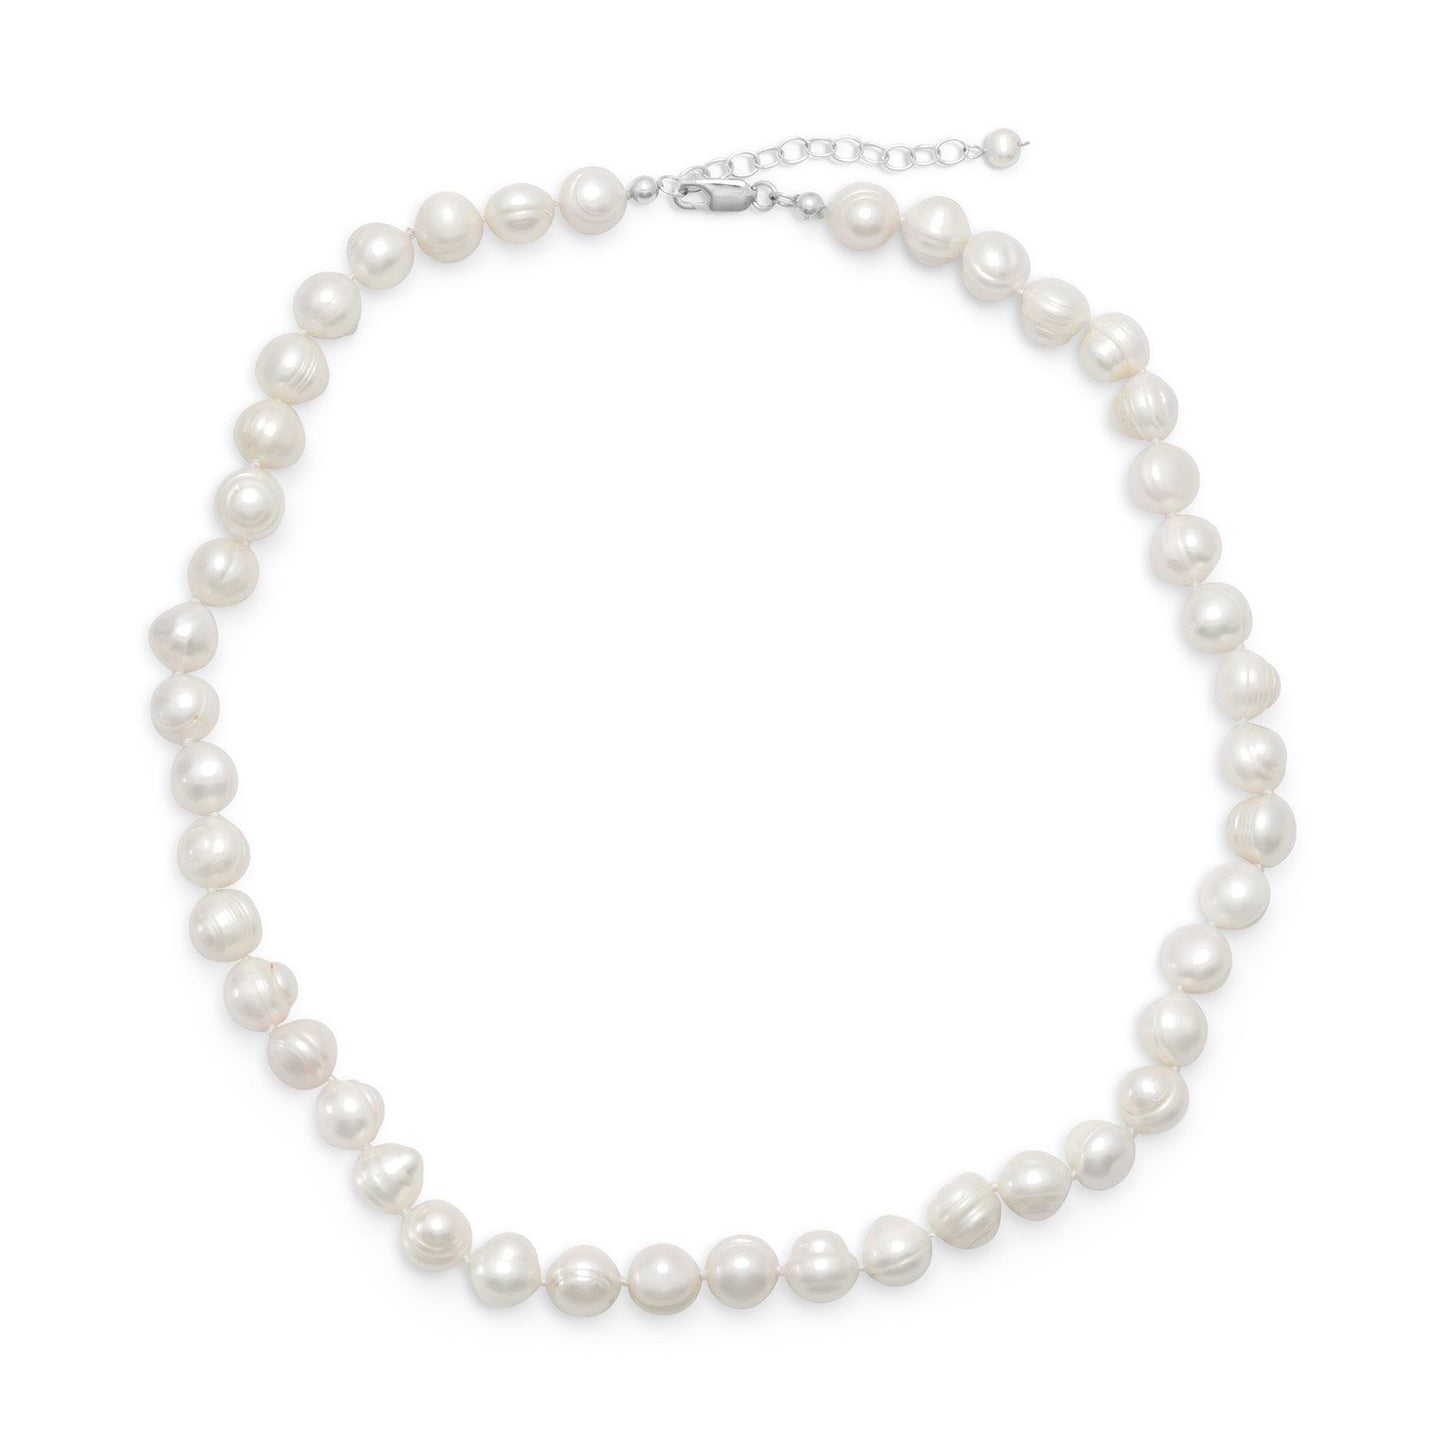 18"+2" Extension White Cultured Freshwater Pearl Necklace